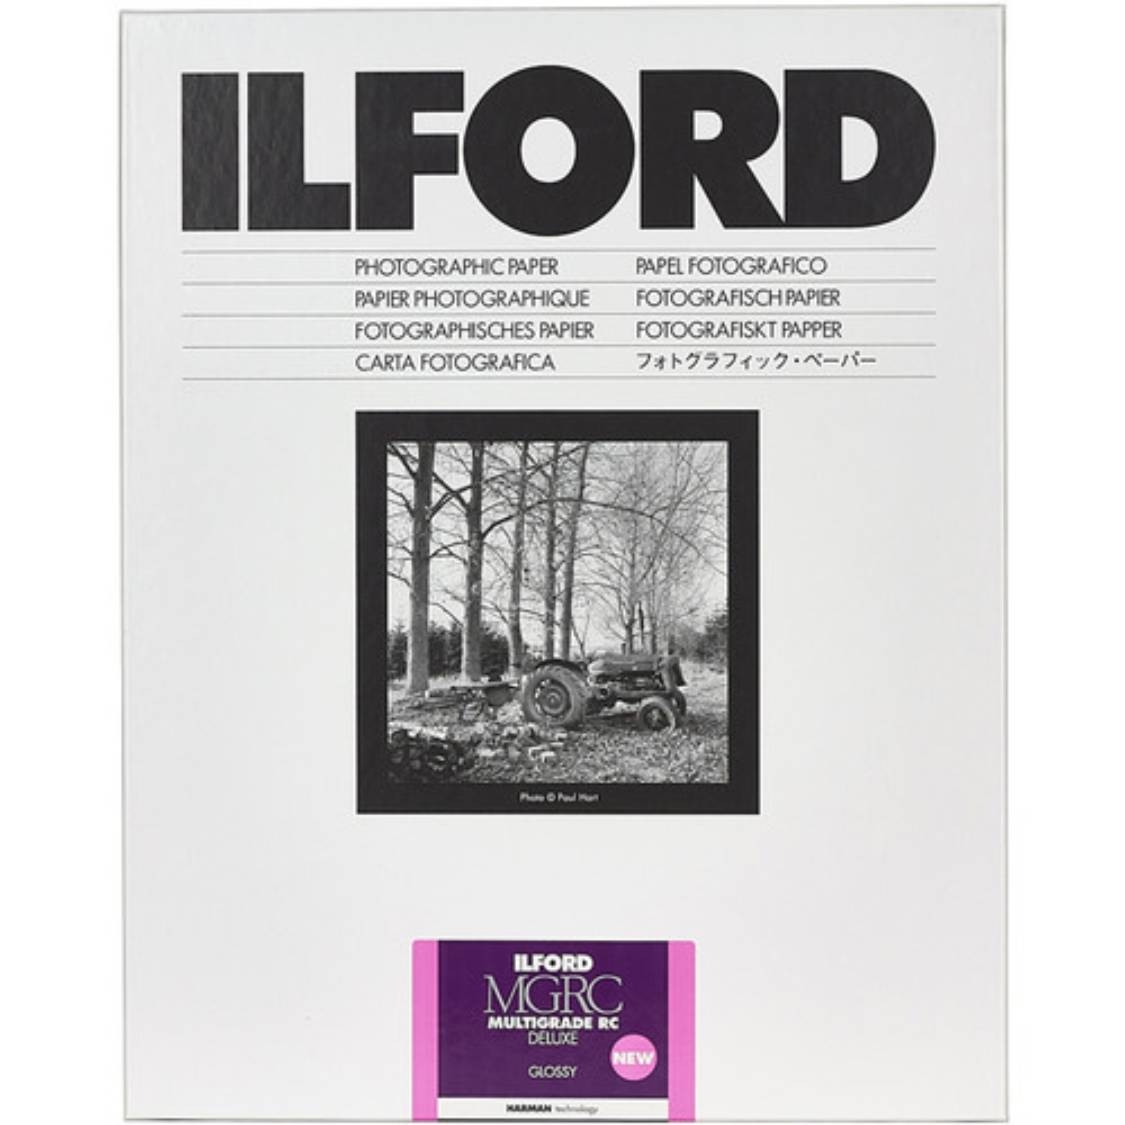 Ilford Multigrade 5 Deluxe 16x20-inch Glossy Paper (10 sheets)